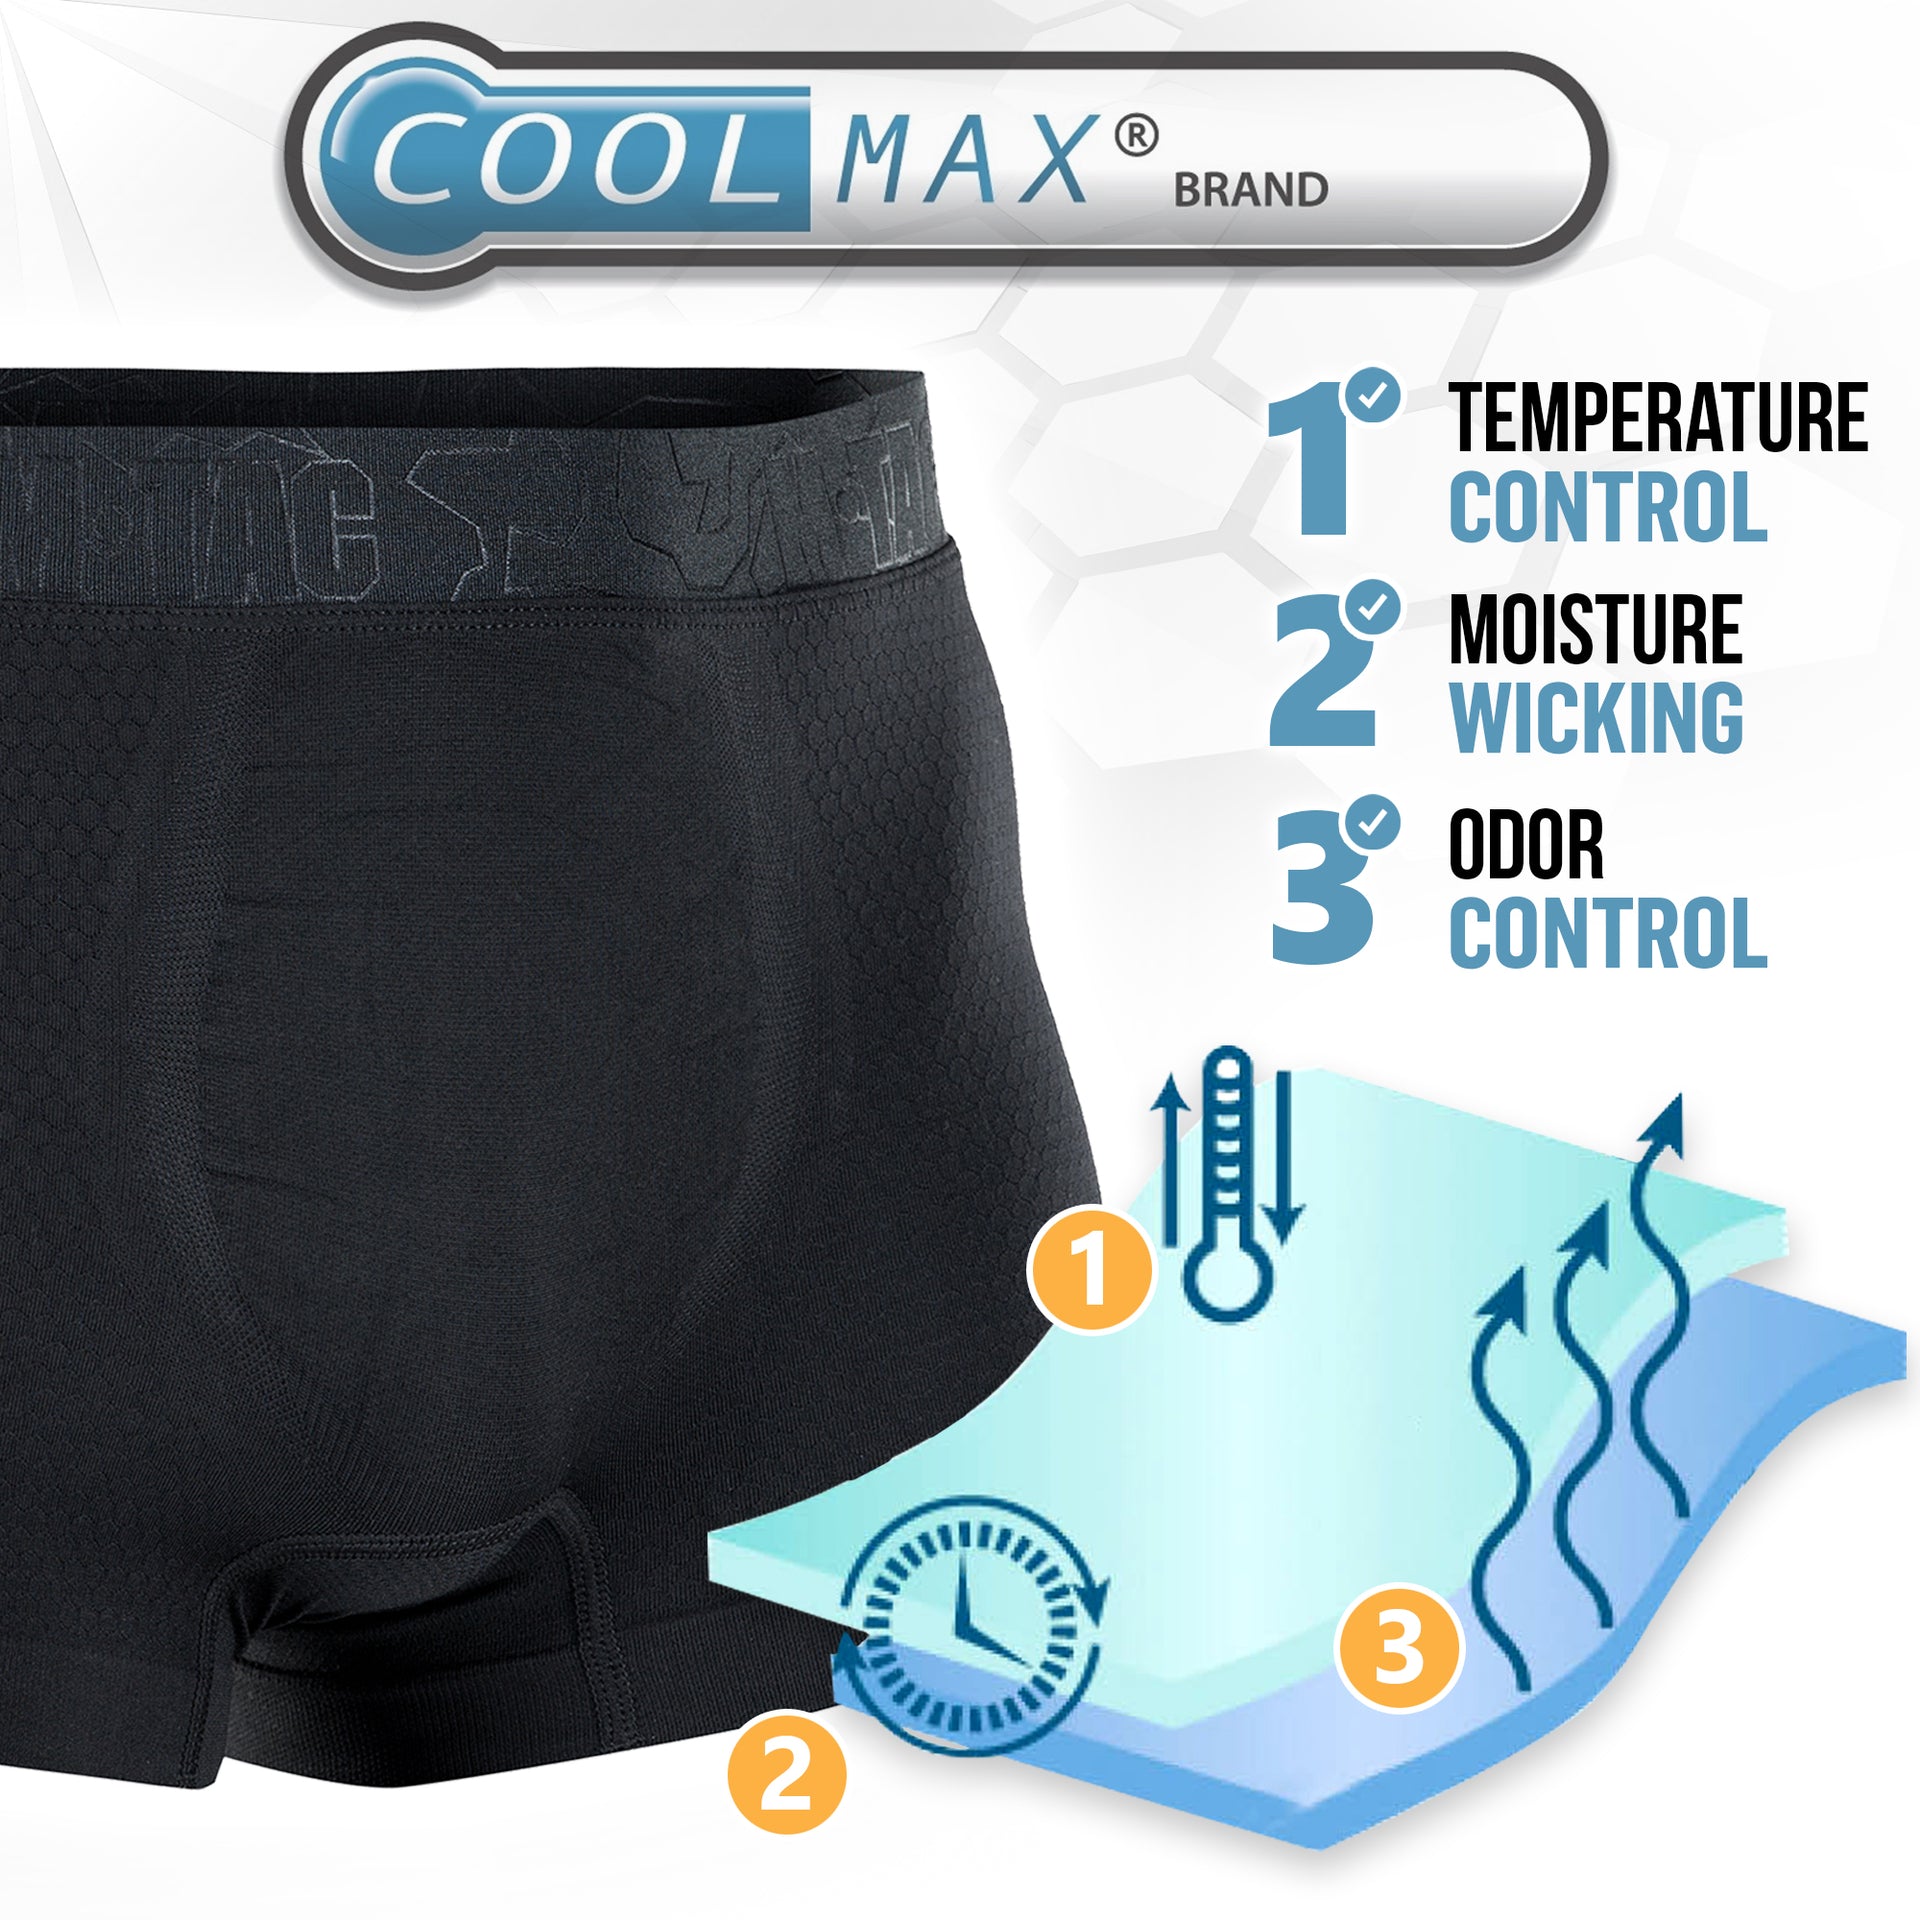 M-Tac - Tactical Boxer Shorts 93/7 - Coyote - 70009017. best price, check  availability, buy online with